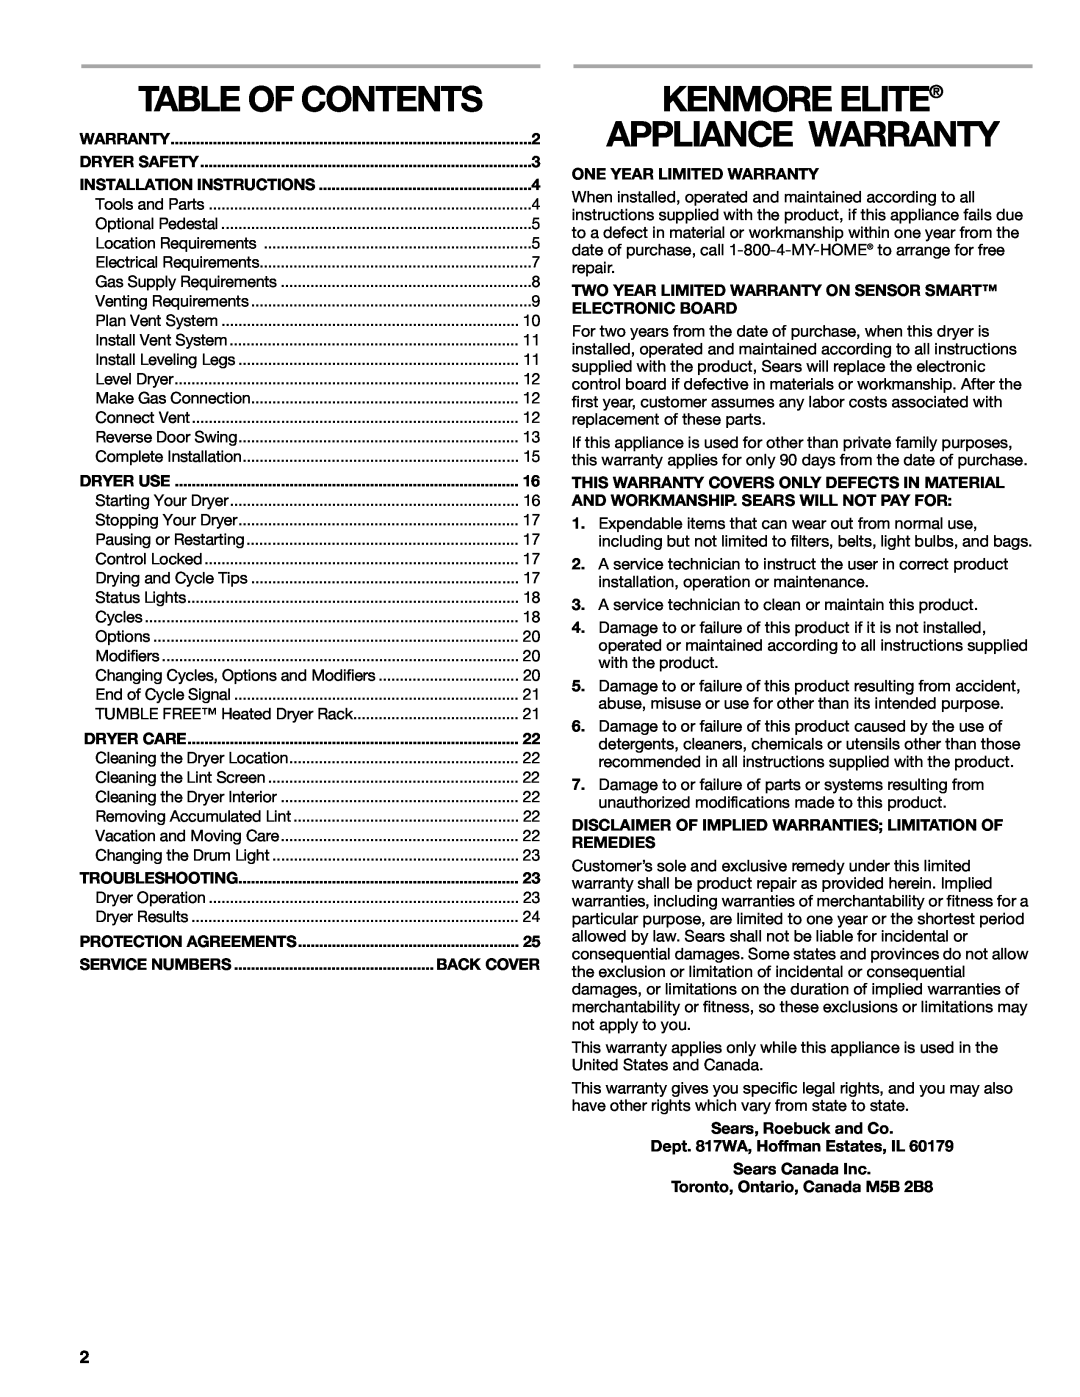 Sears 9709 Table Of Contents, Kenmore Elite Appliance Warranty, Service Numbers, Back Cover, One Year Limited Warranty 